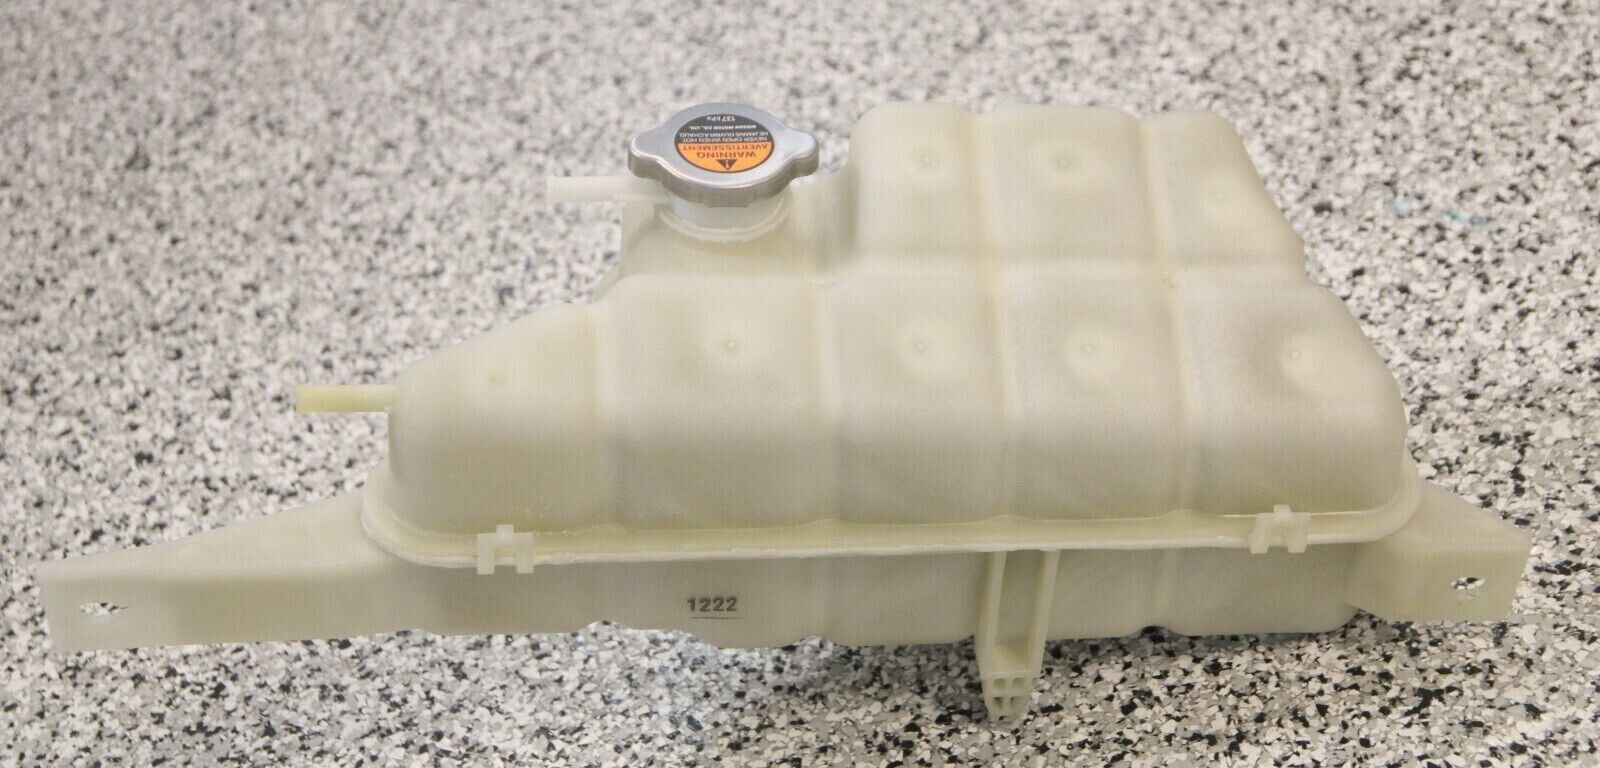 NISSAN GT-R (2009 to 2024) COOLANT RECOVERY RESERVOIR - EXCELLENT CONDITION